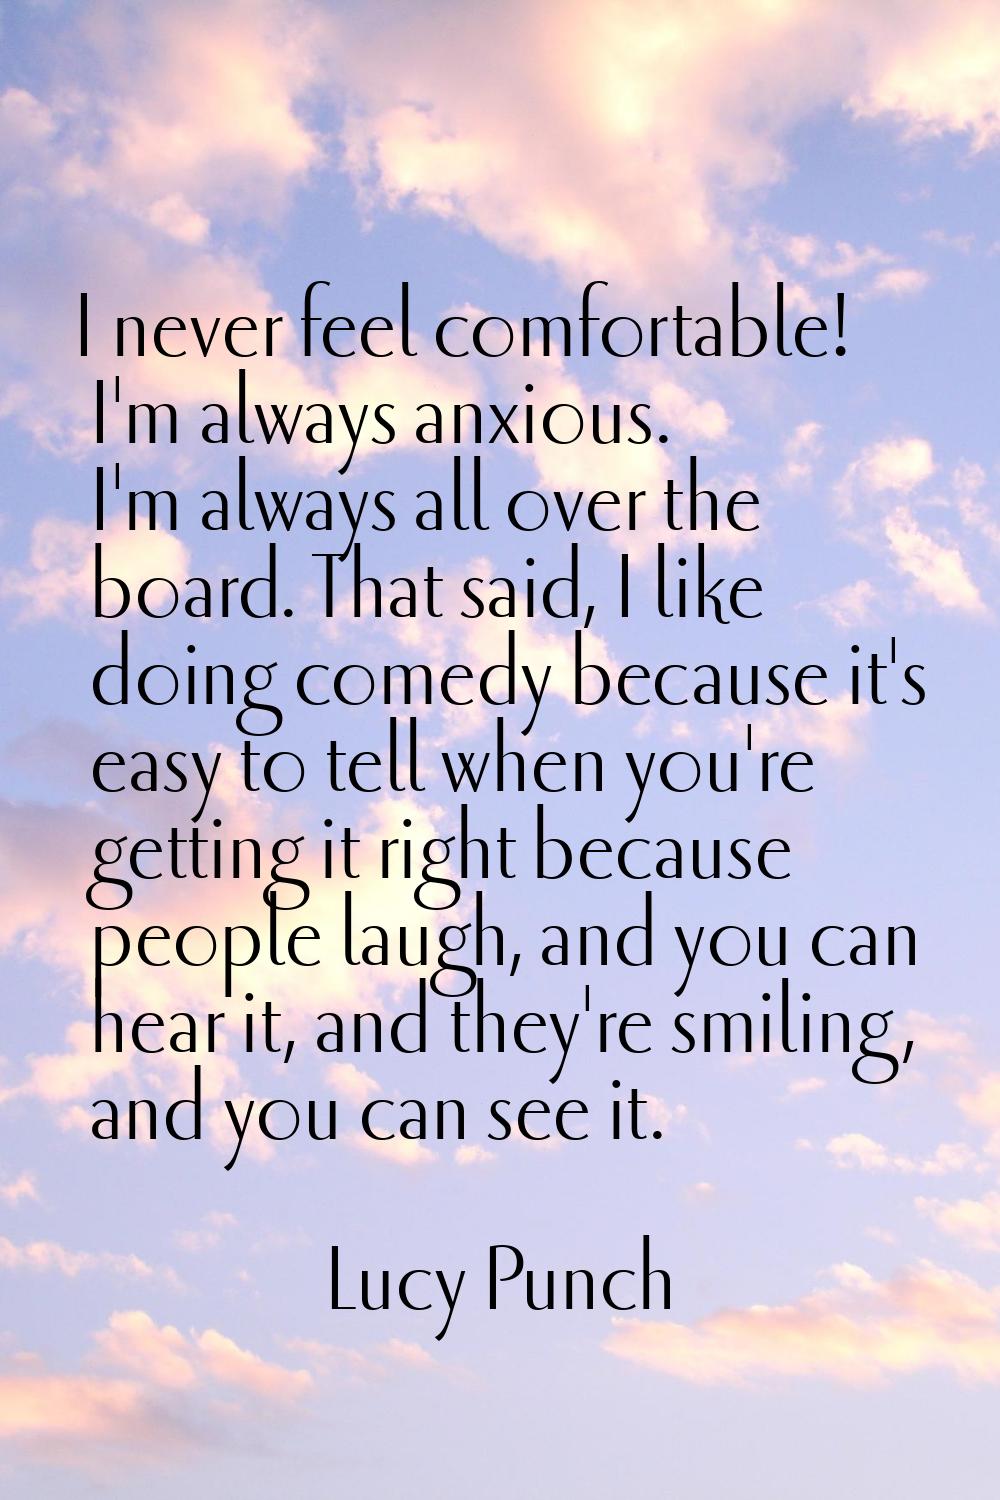 I never feel comfortable! I'm always anxious. I'm always all over the board. That said, I like doin